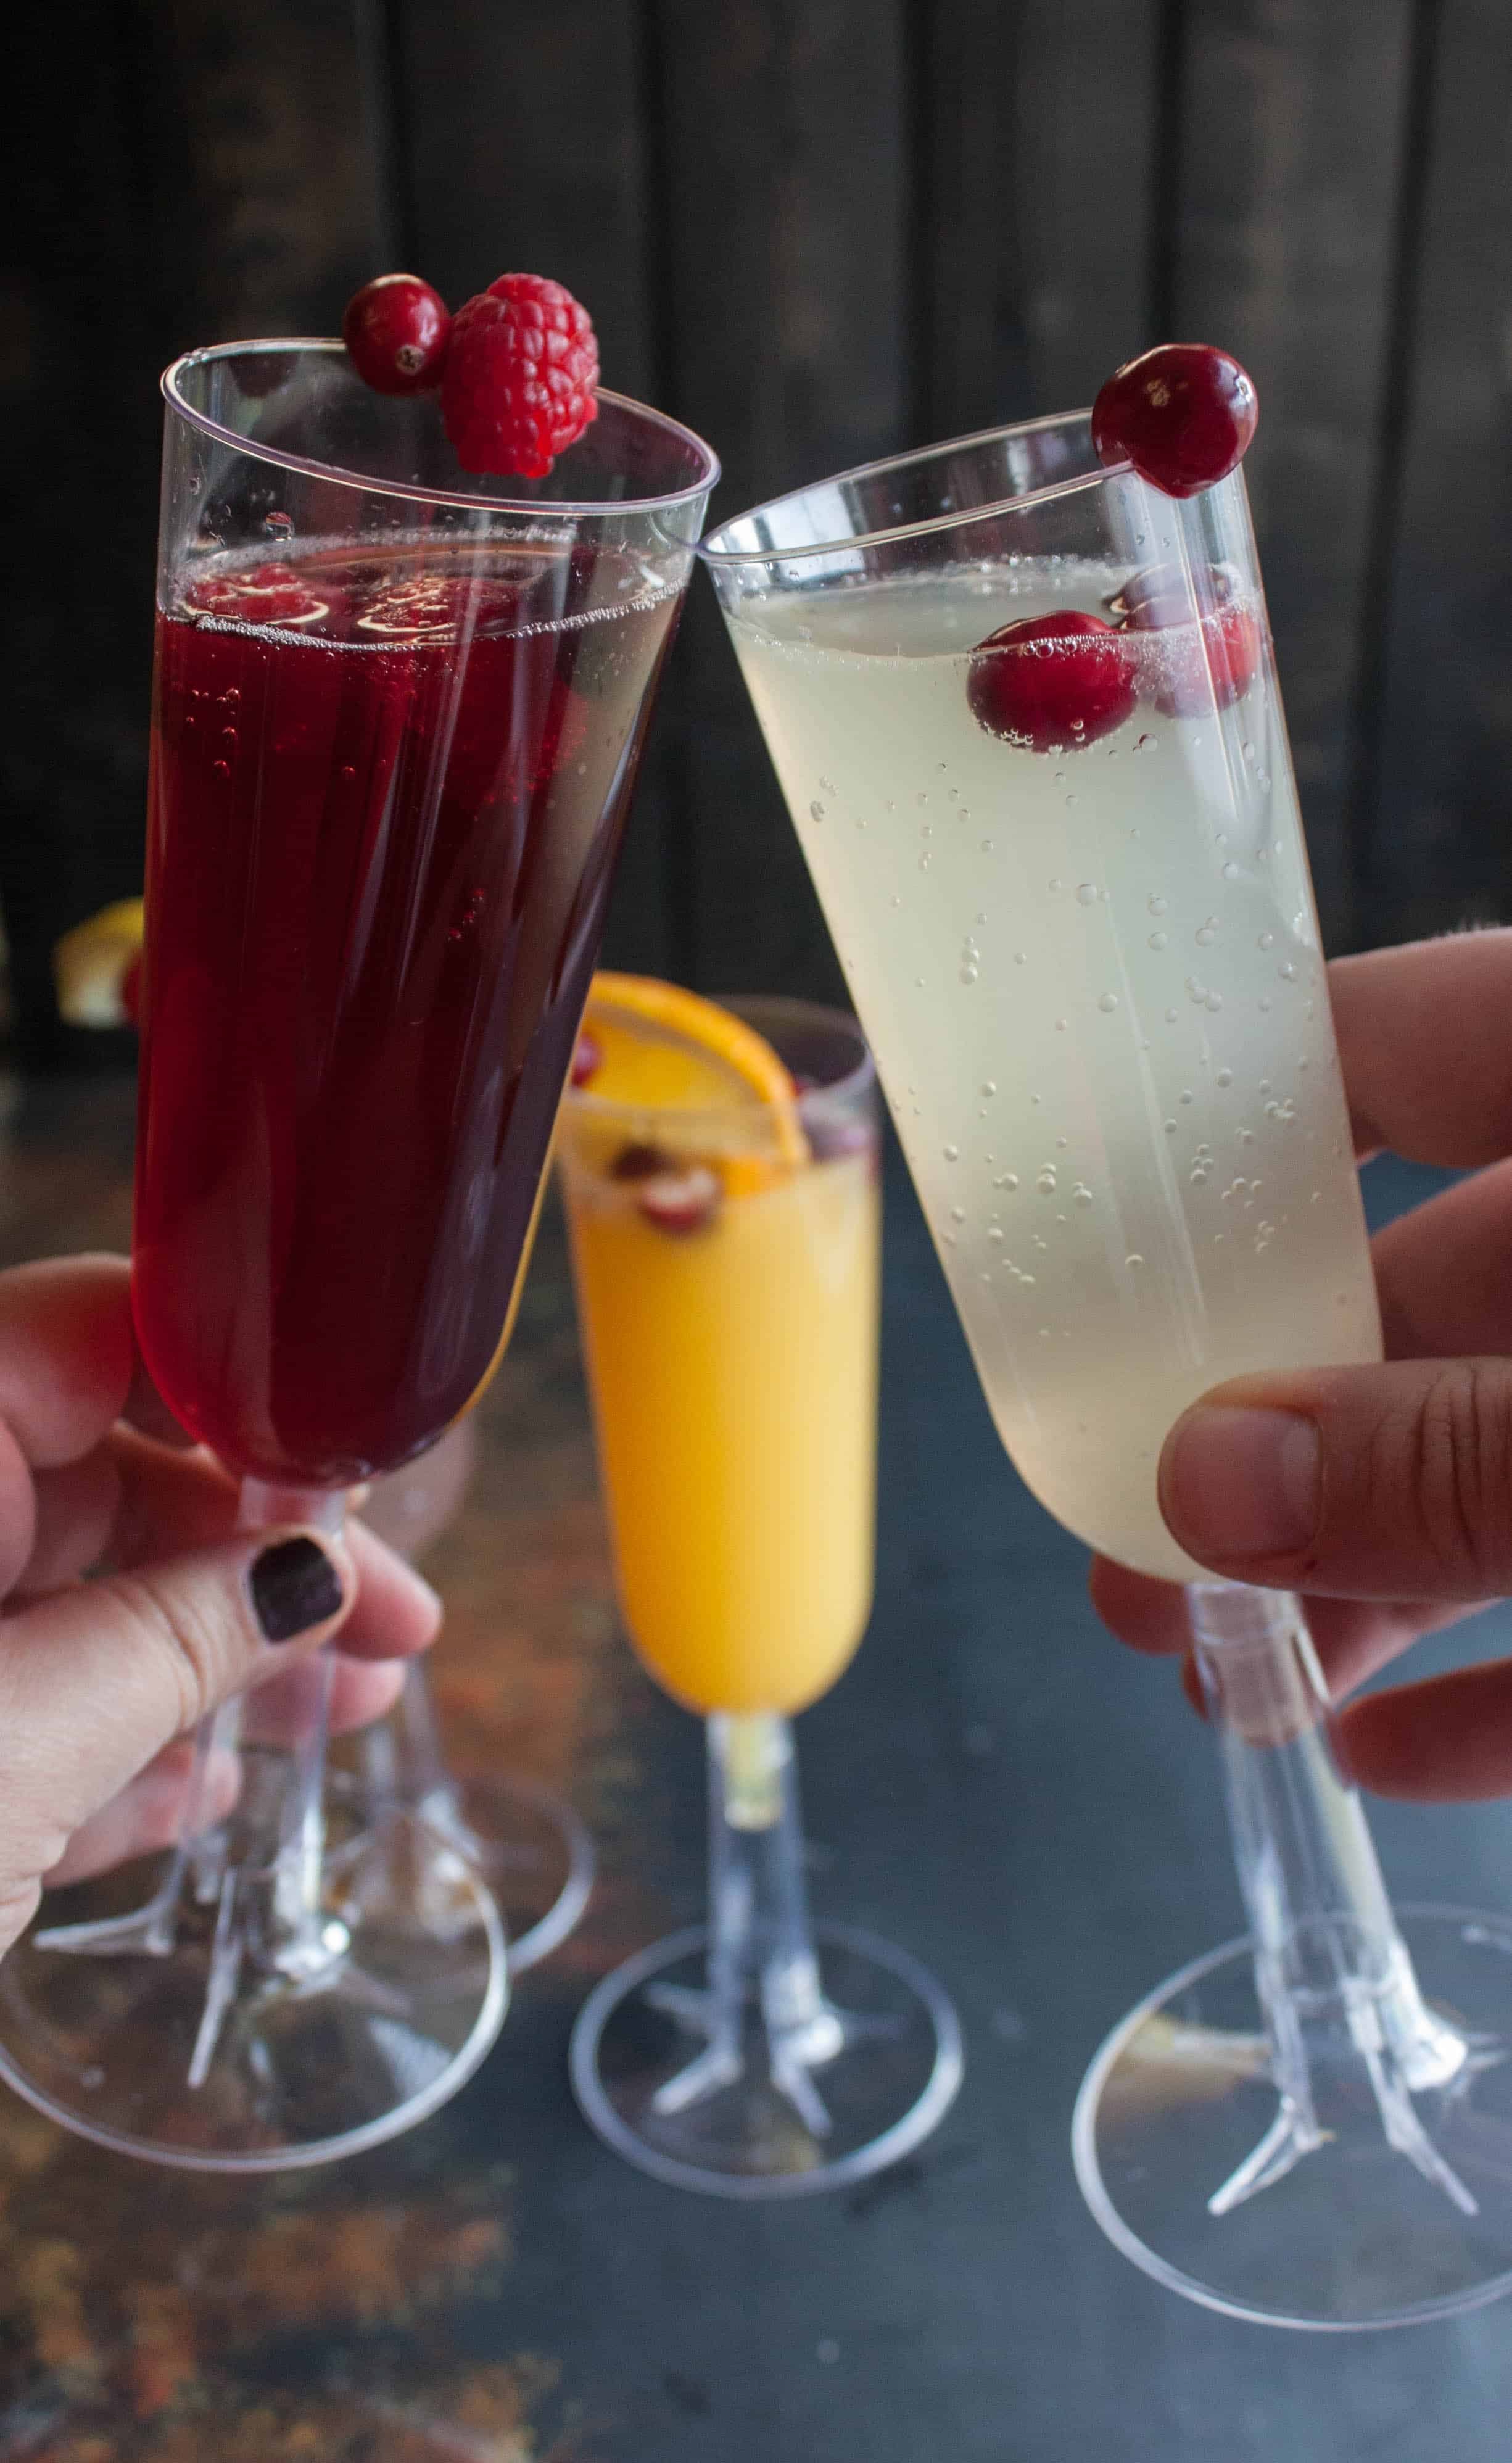 Cheers with two champagne flutes filled with mimosas